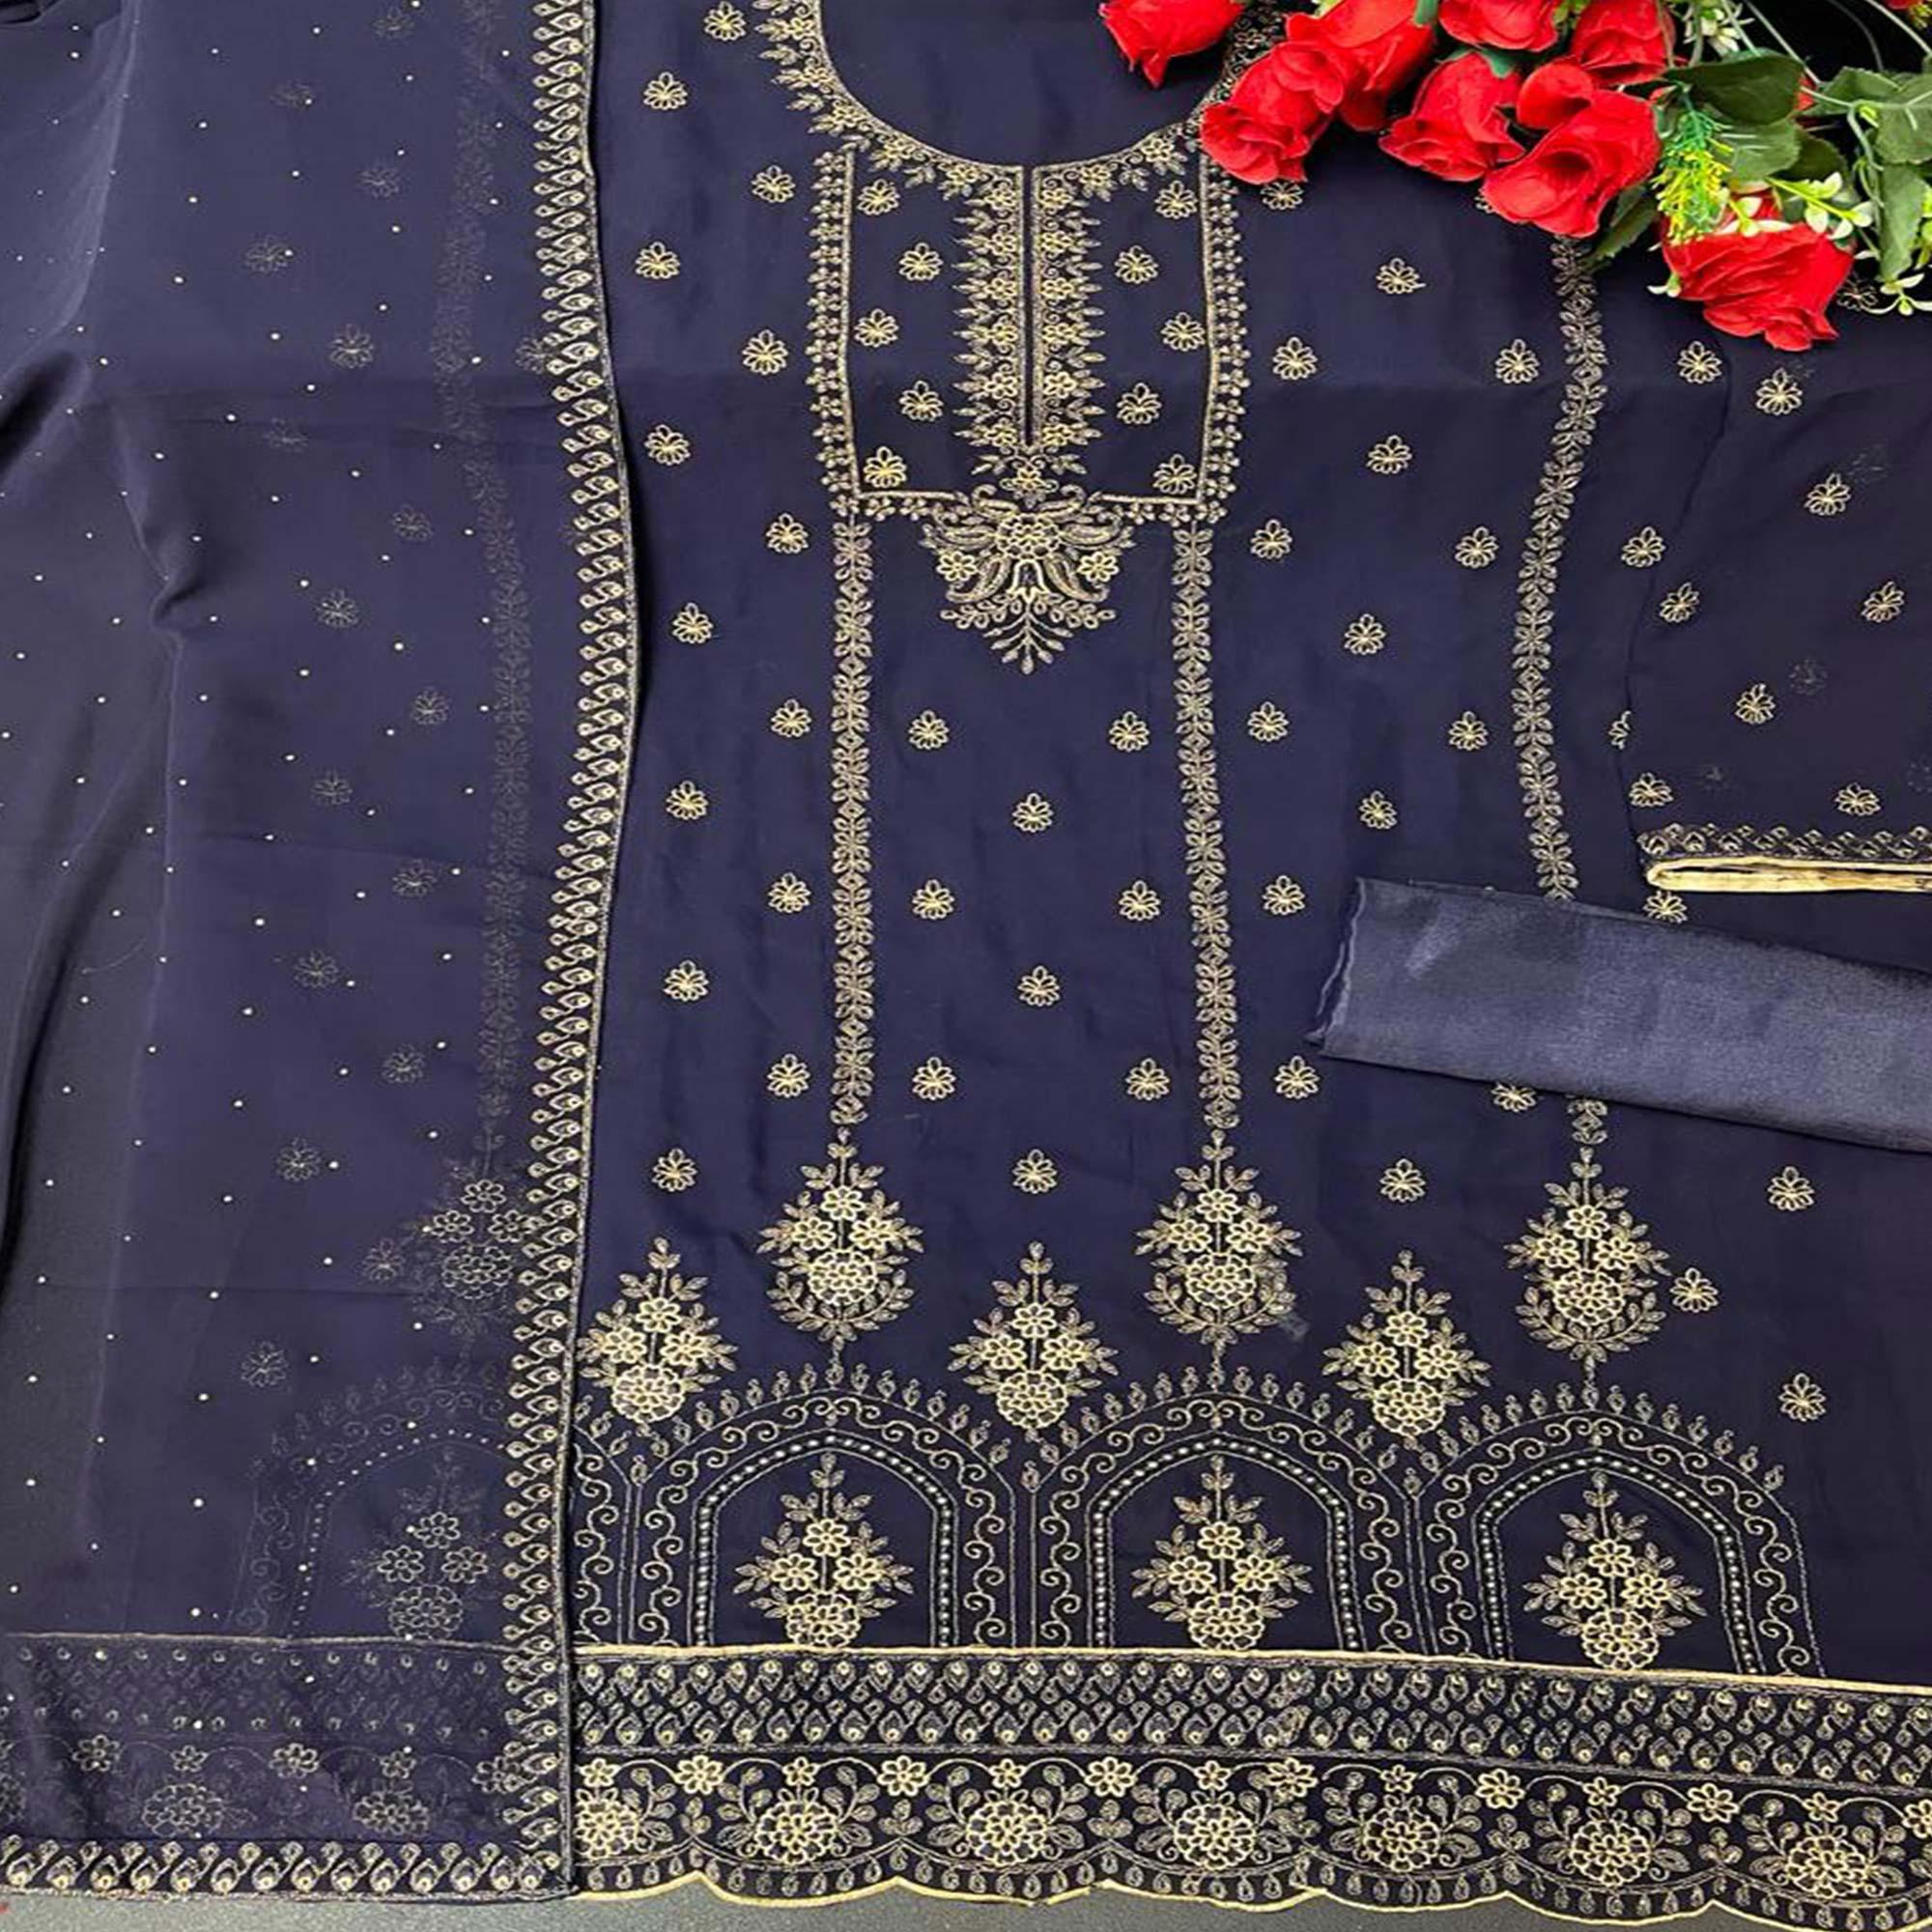 Navy Blue Floral Embroidered Georgette Pakistani Suit - Peachmode